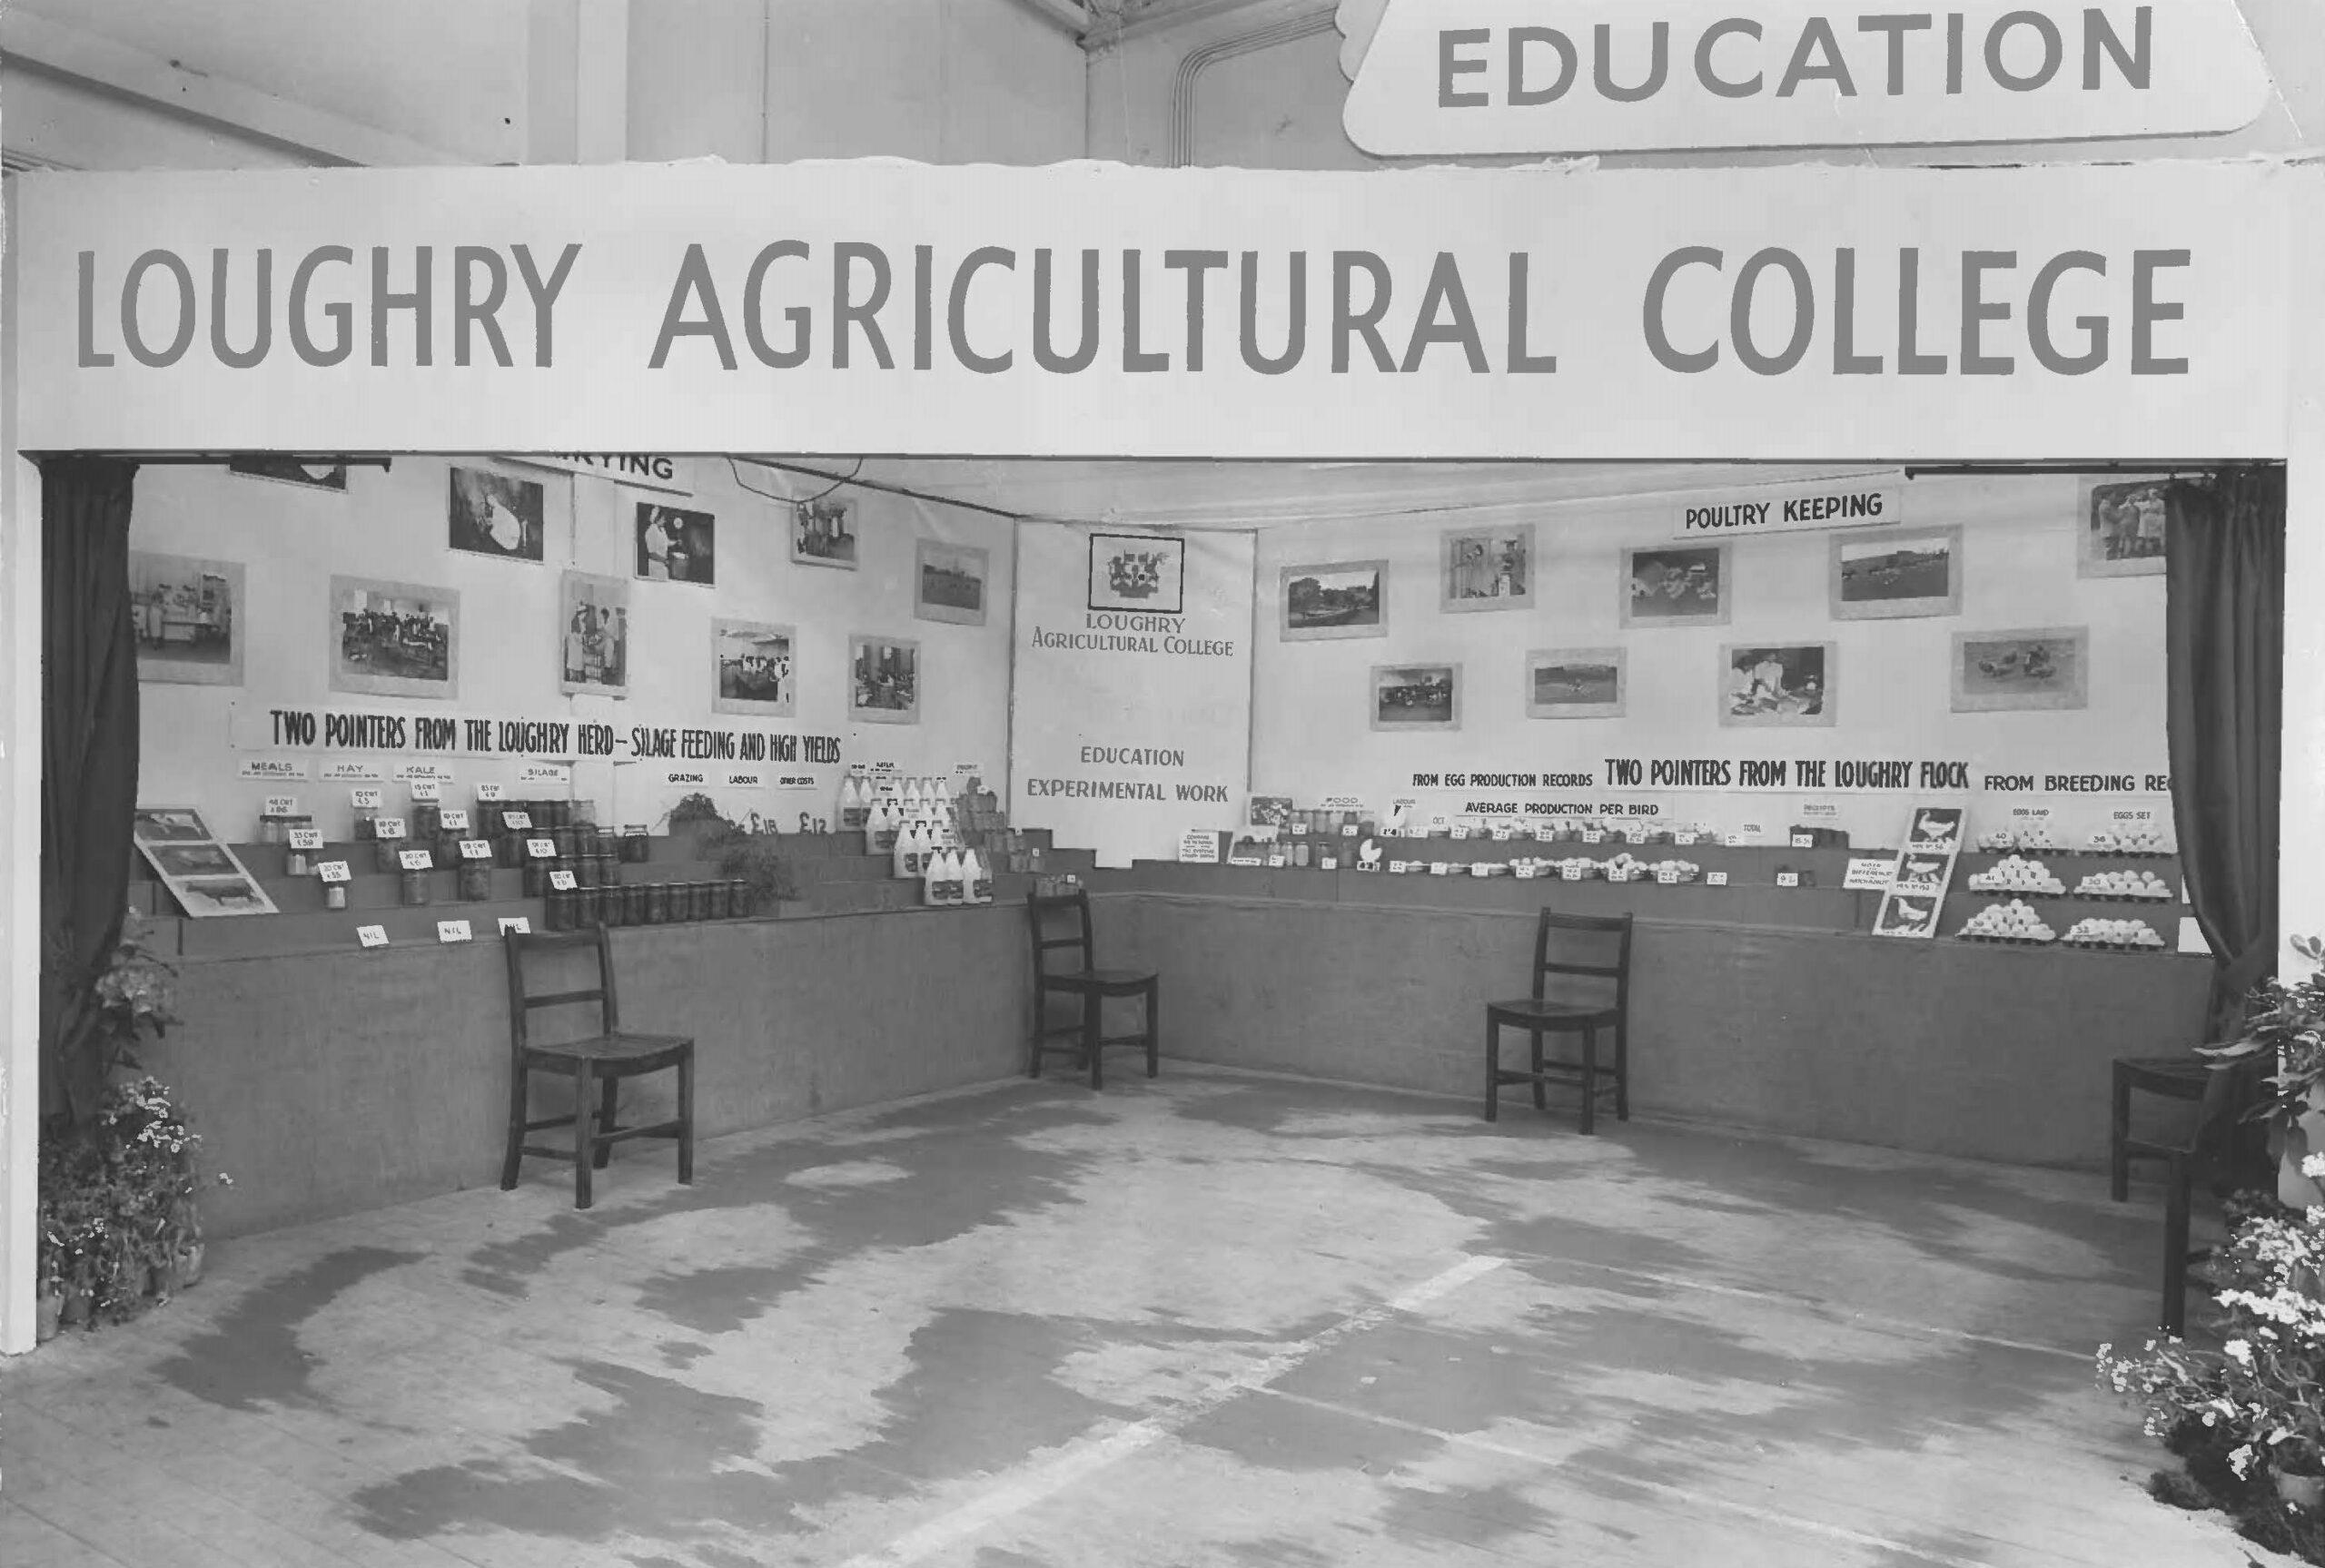 The Loughry exhibit at the Balmoral Show in 1952. CAFRE and its preceding colleges enjoy a valued history in meeting with the agri-food industry at the Balmoral Show.